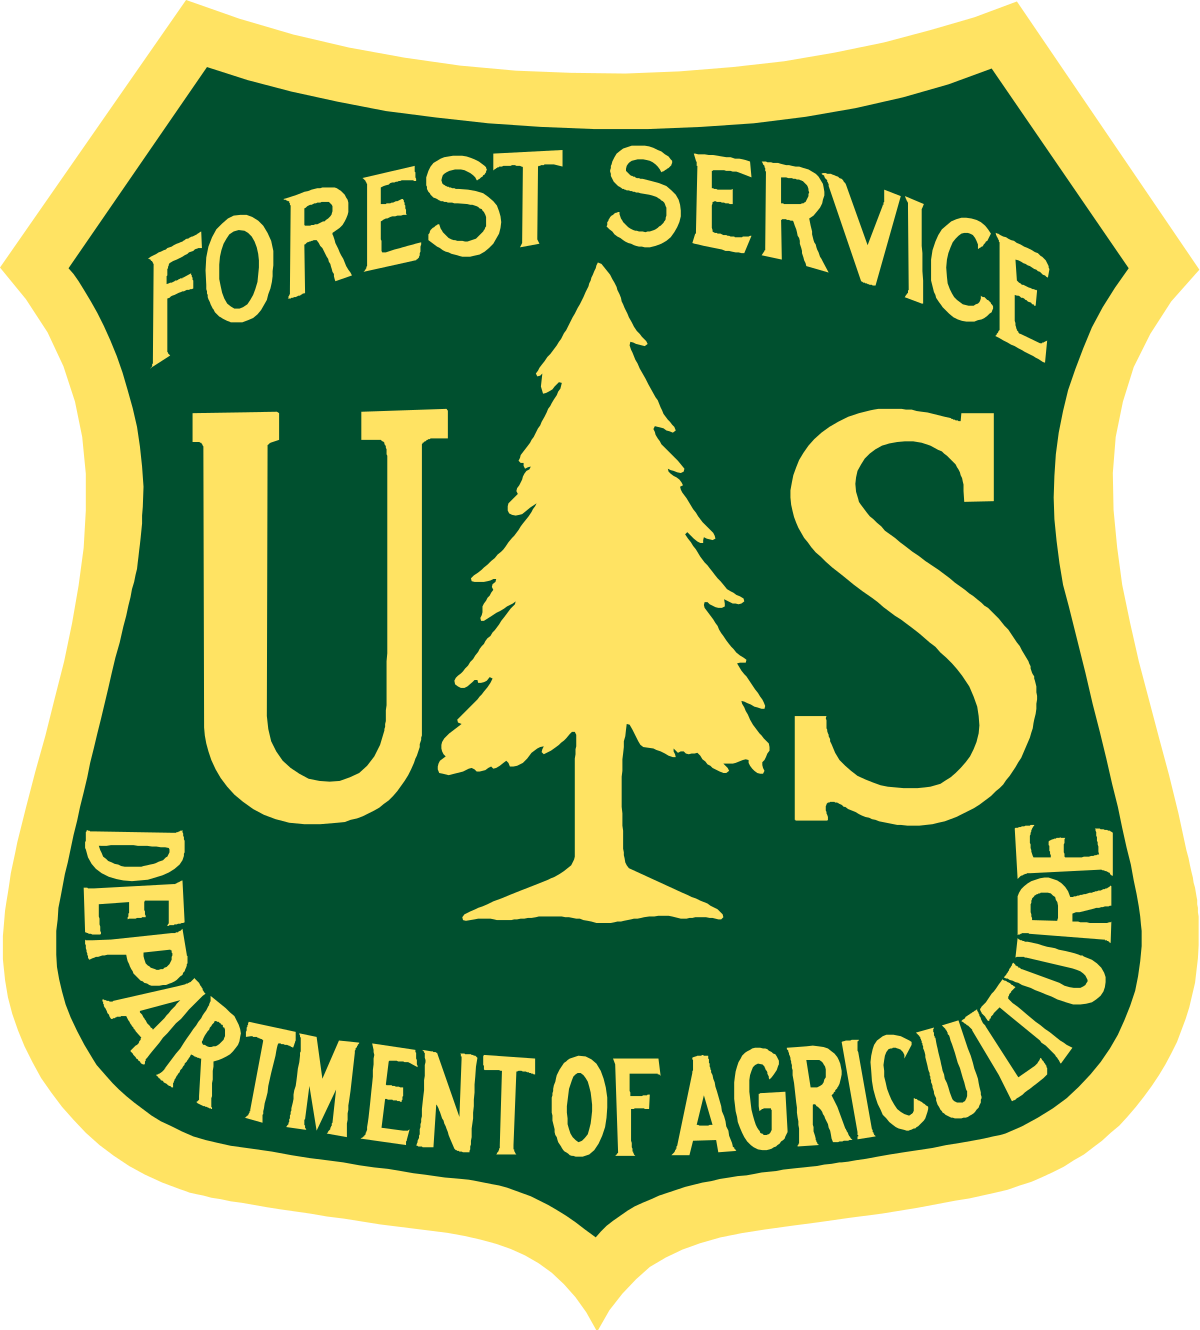 United States Forest Service - Wikipedia